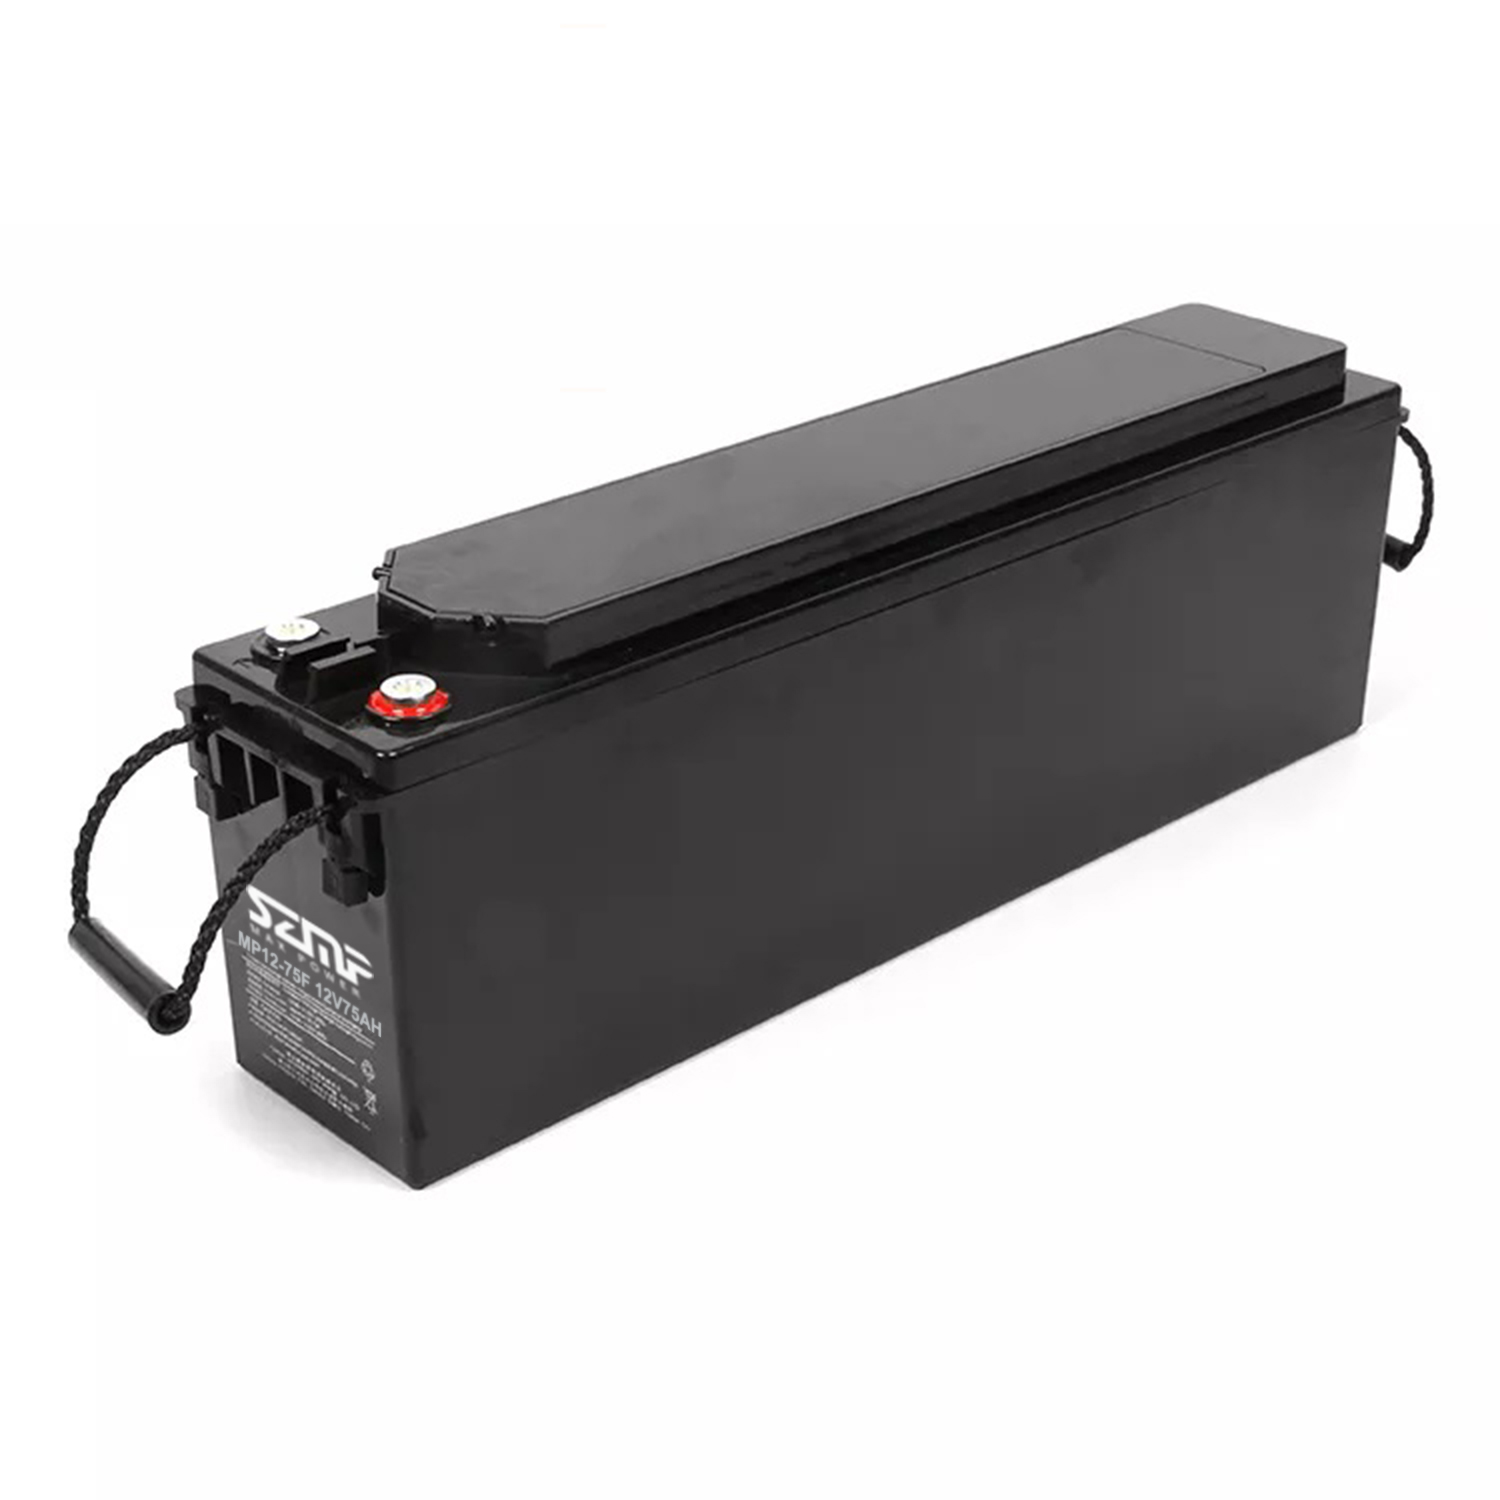 max power,lead acid battery,lifepo4 battery,lithium battery ,solar battery ,electric bike battery,battery factory,  telecom base station battery, electric scooter battery